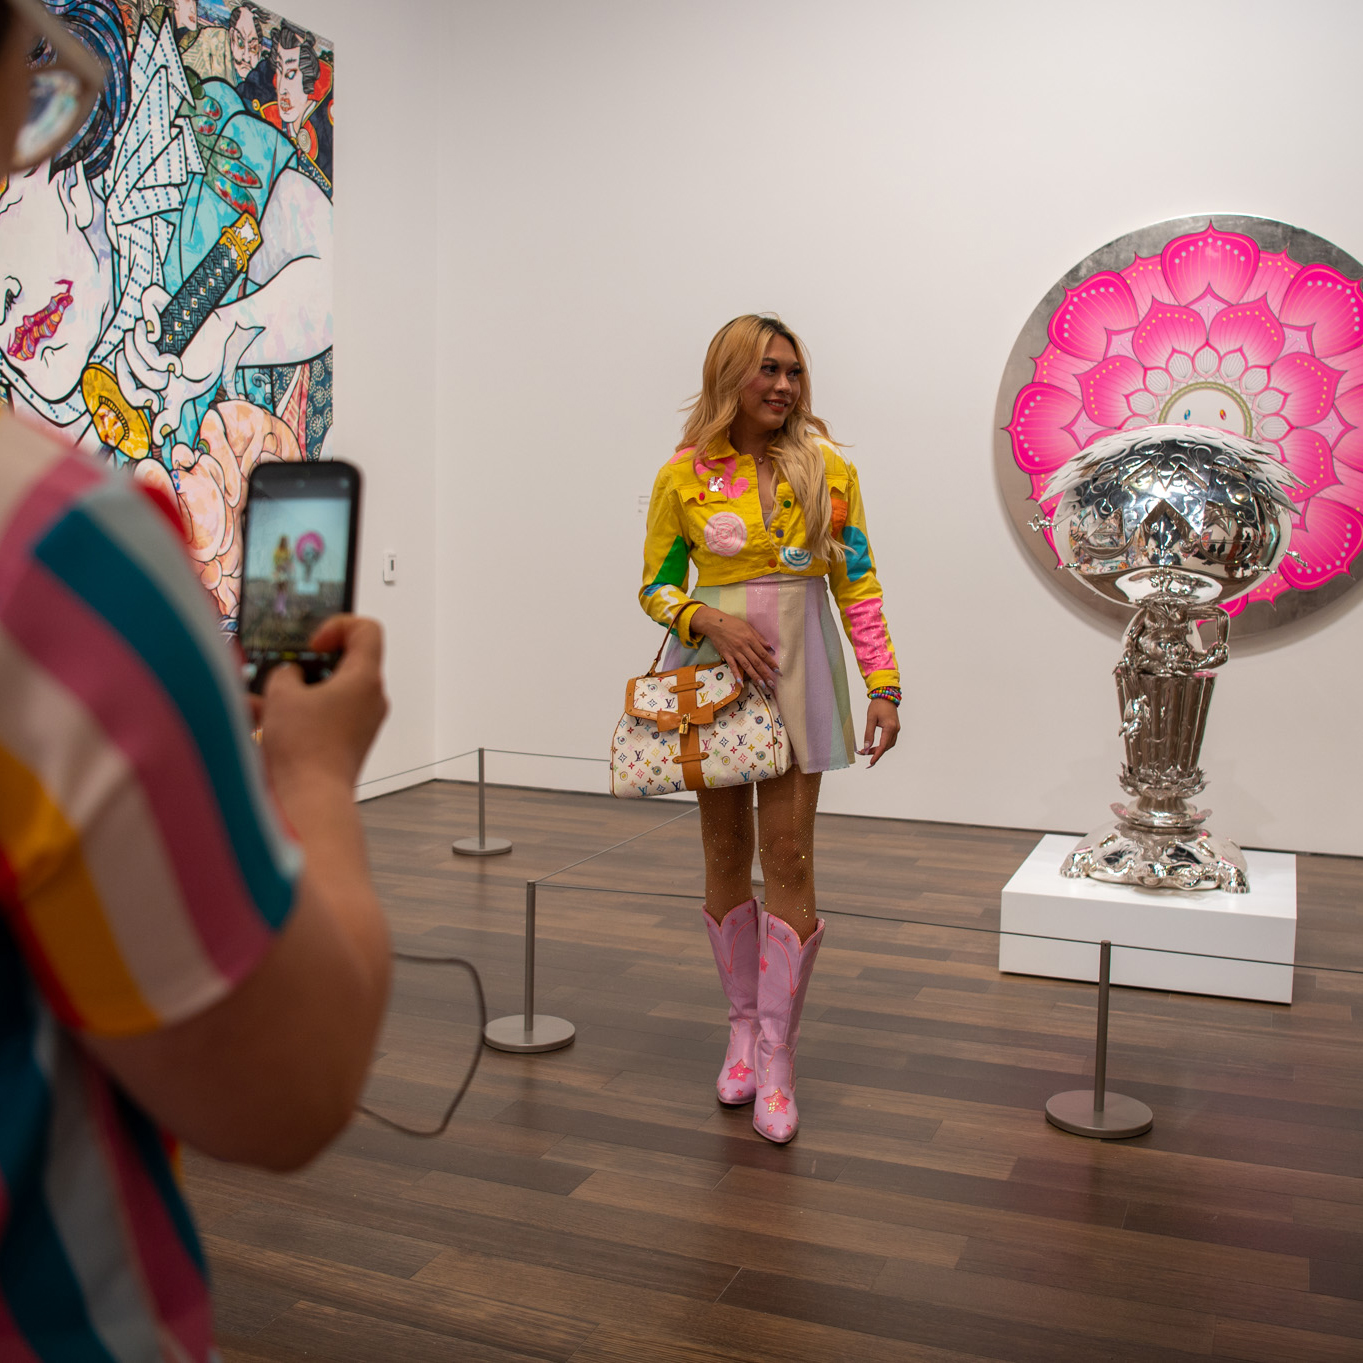 A person is photographed in a colorful outfit inside an art gallery with vibrant artwork and a shiny sculpture.